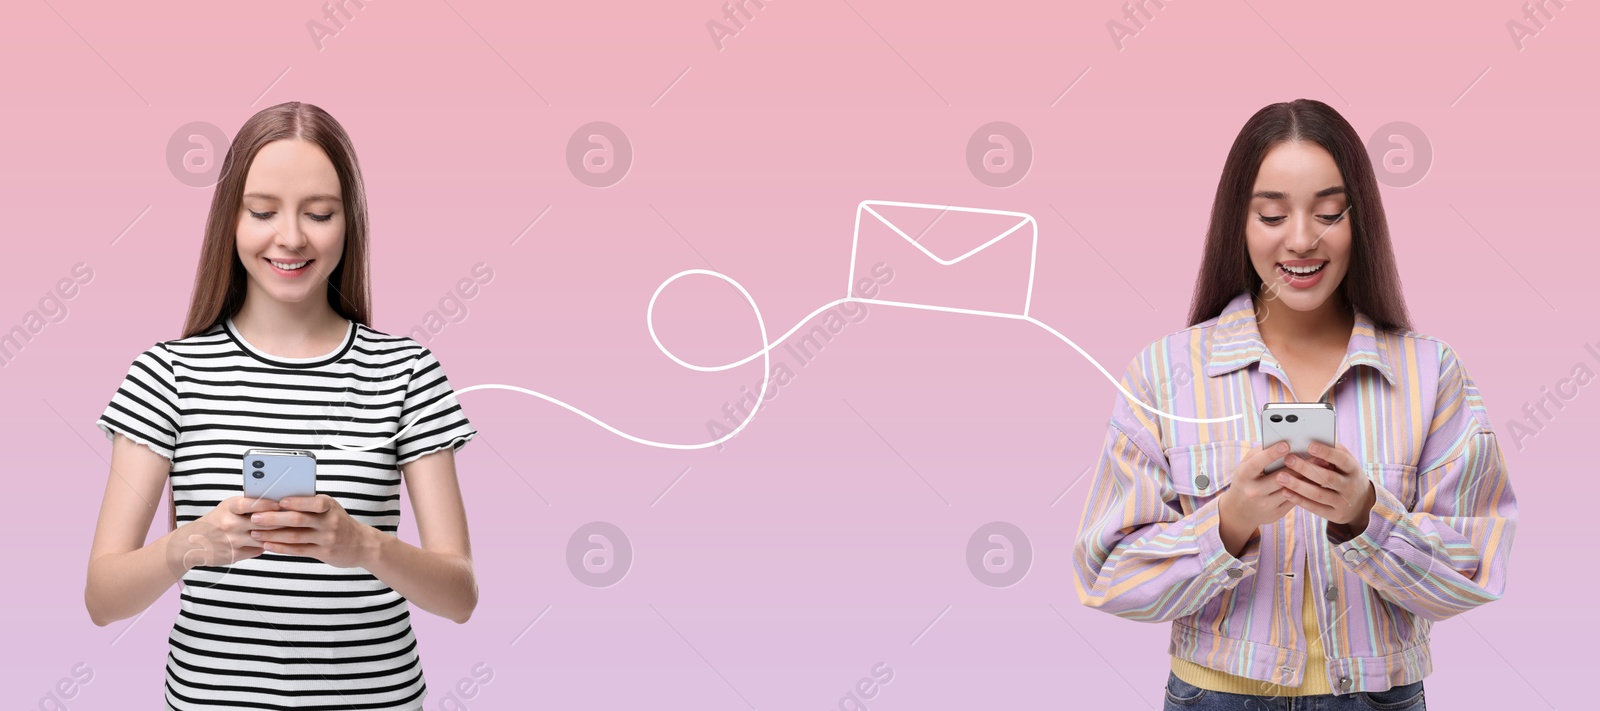 Image of Women with smartphones messaging on pink gradient background, banner design. Drawing of envelope between them